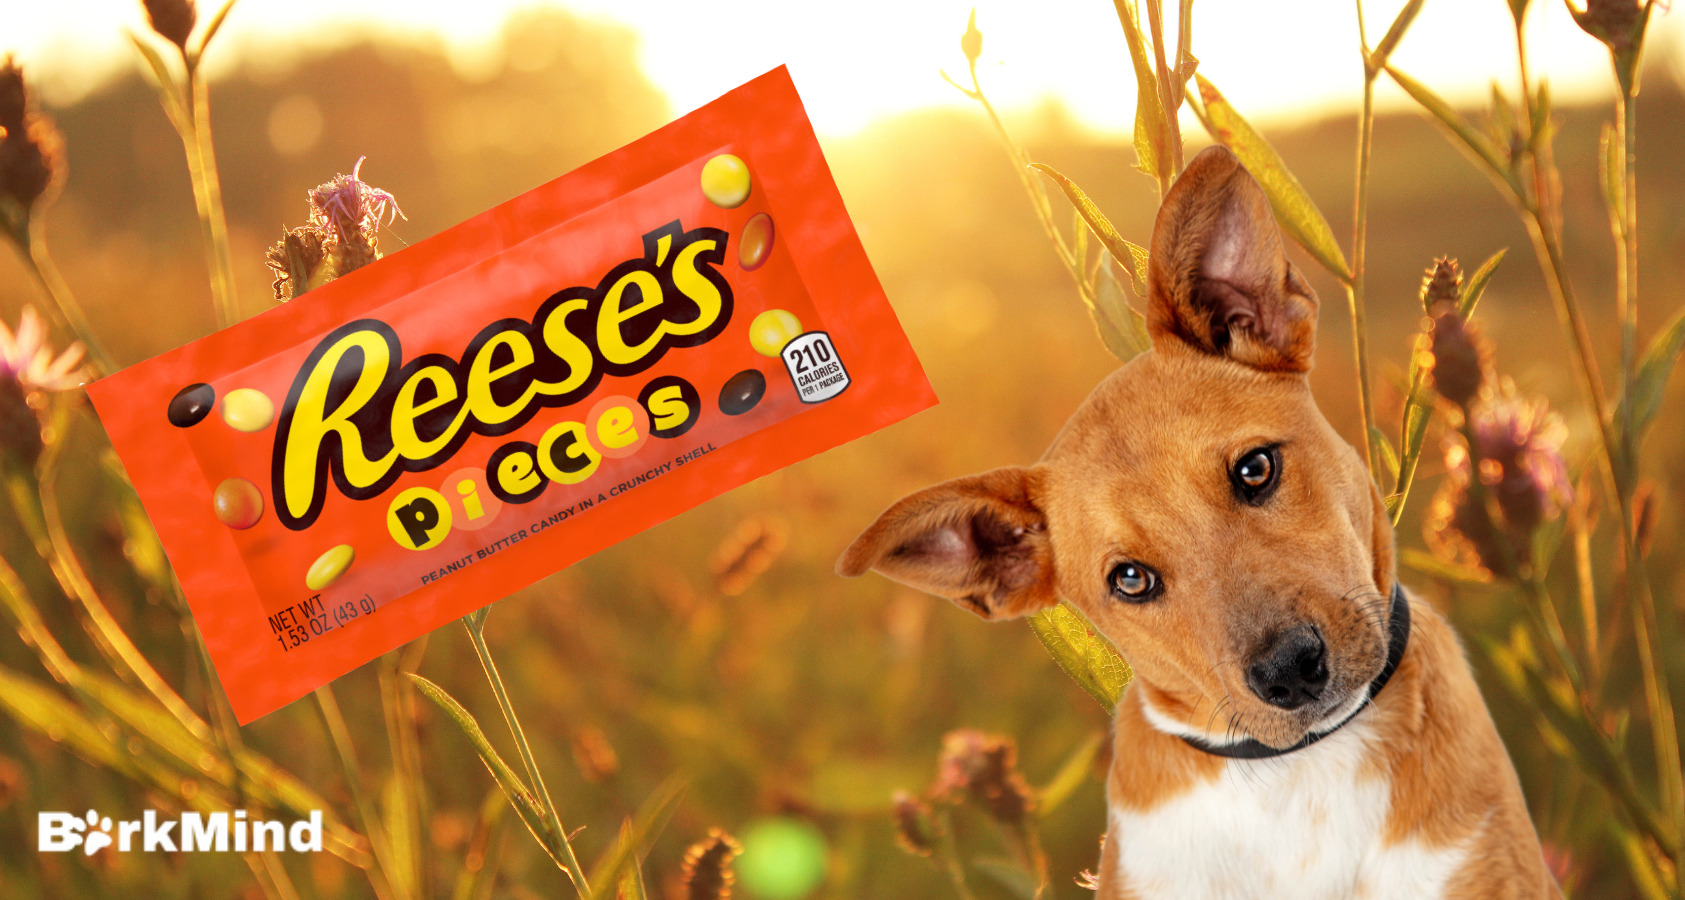 Can Dogs Eat Reese's Pieces? Here's What the Experts Say